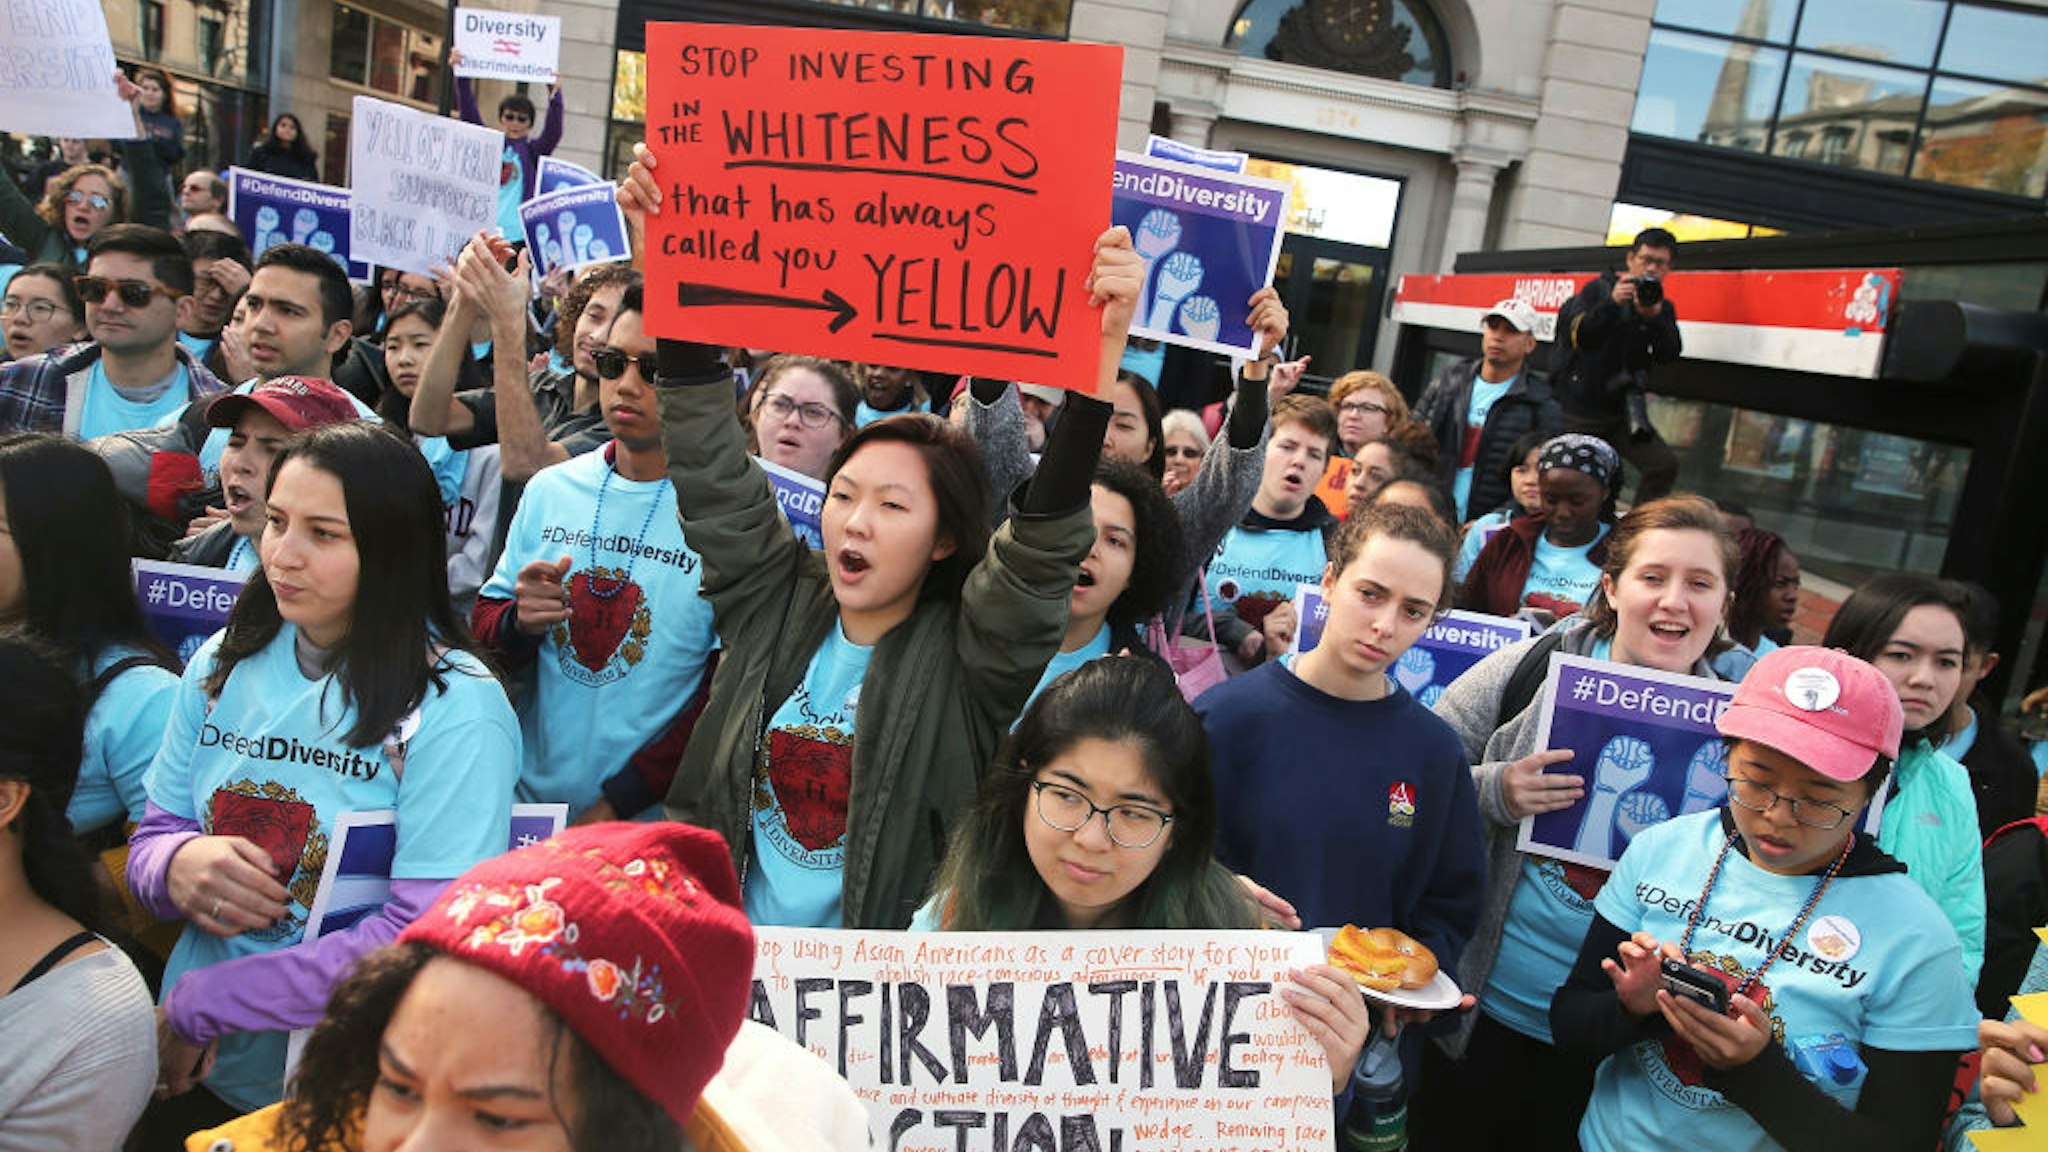 Sarah Chung, a junior at Harvard University, holding orange sign at center, participates in a "defend diversity" pro-affirmative-action rally in Harvard Square in Cambridge, MA on Oct. 14,. 2018.